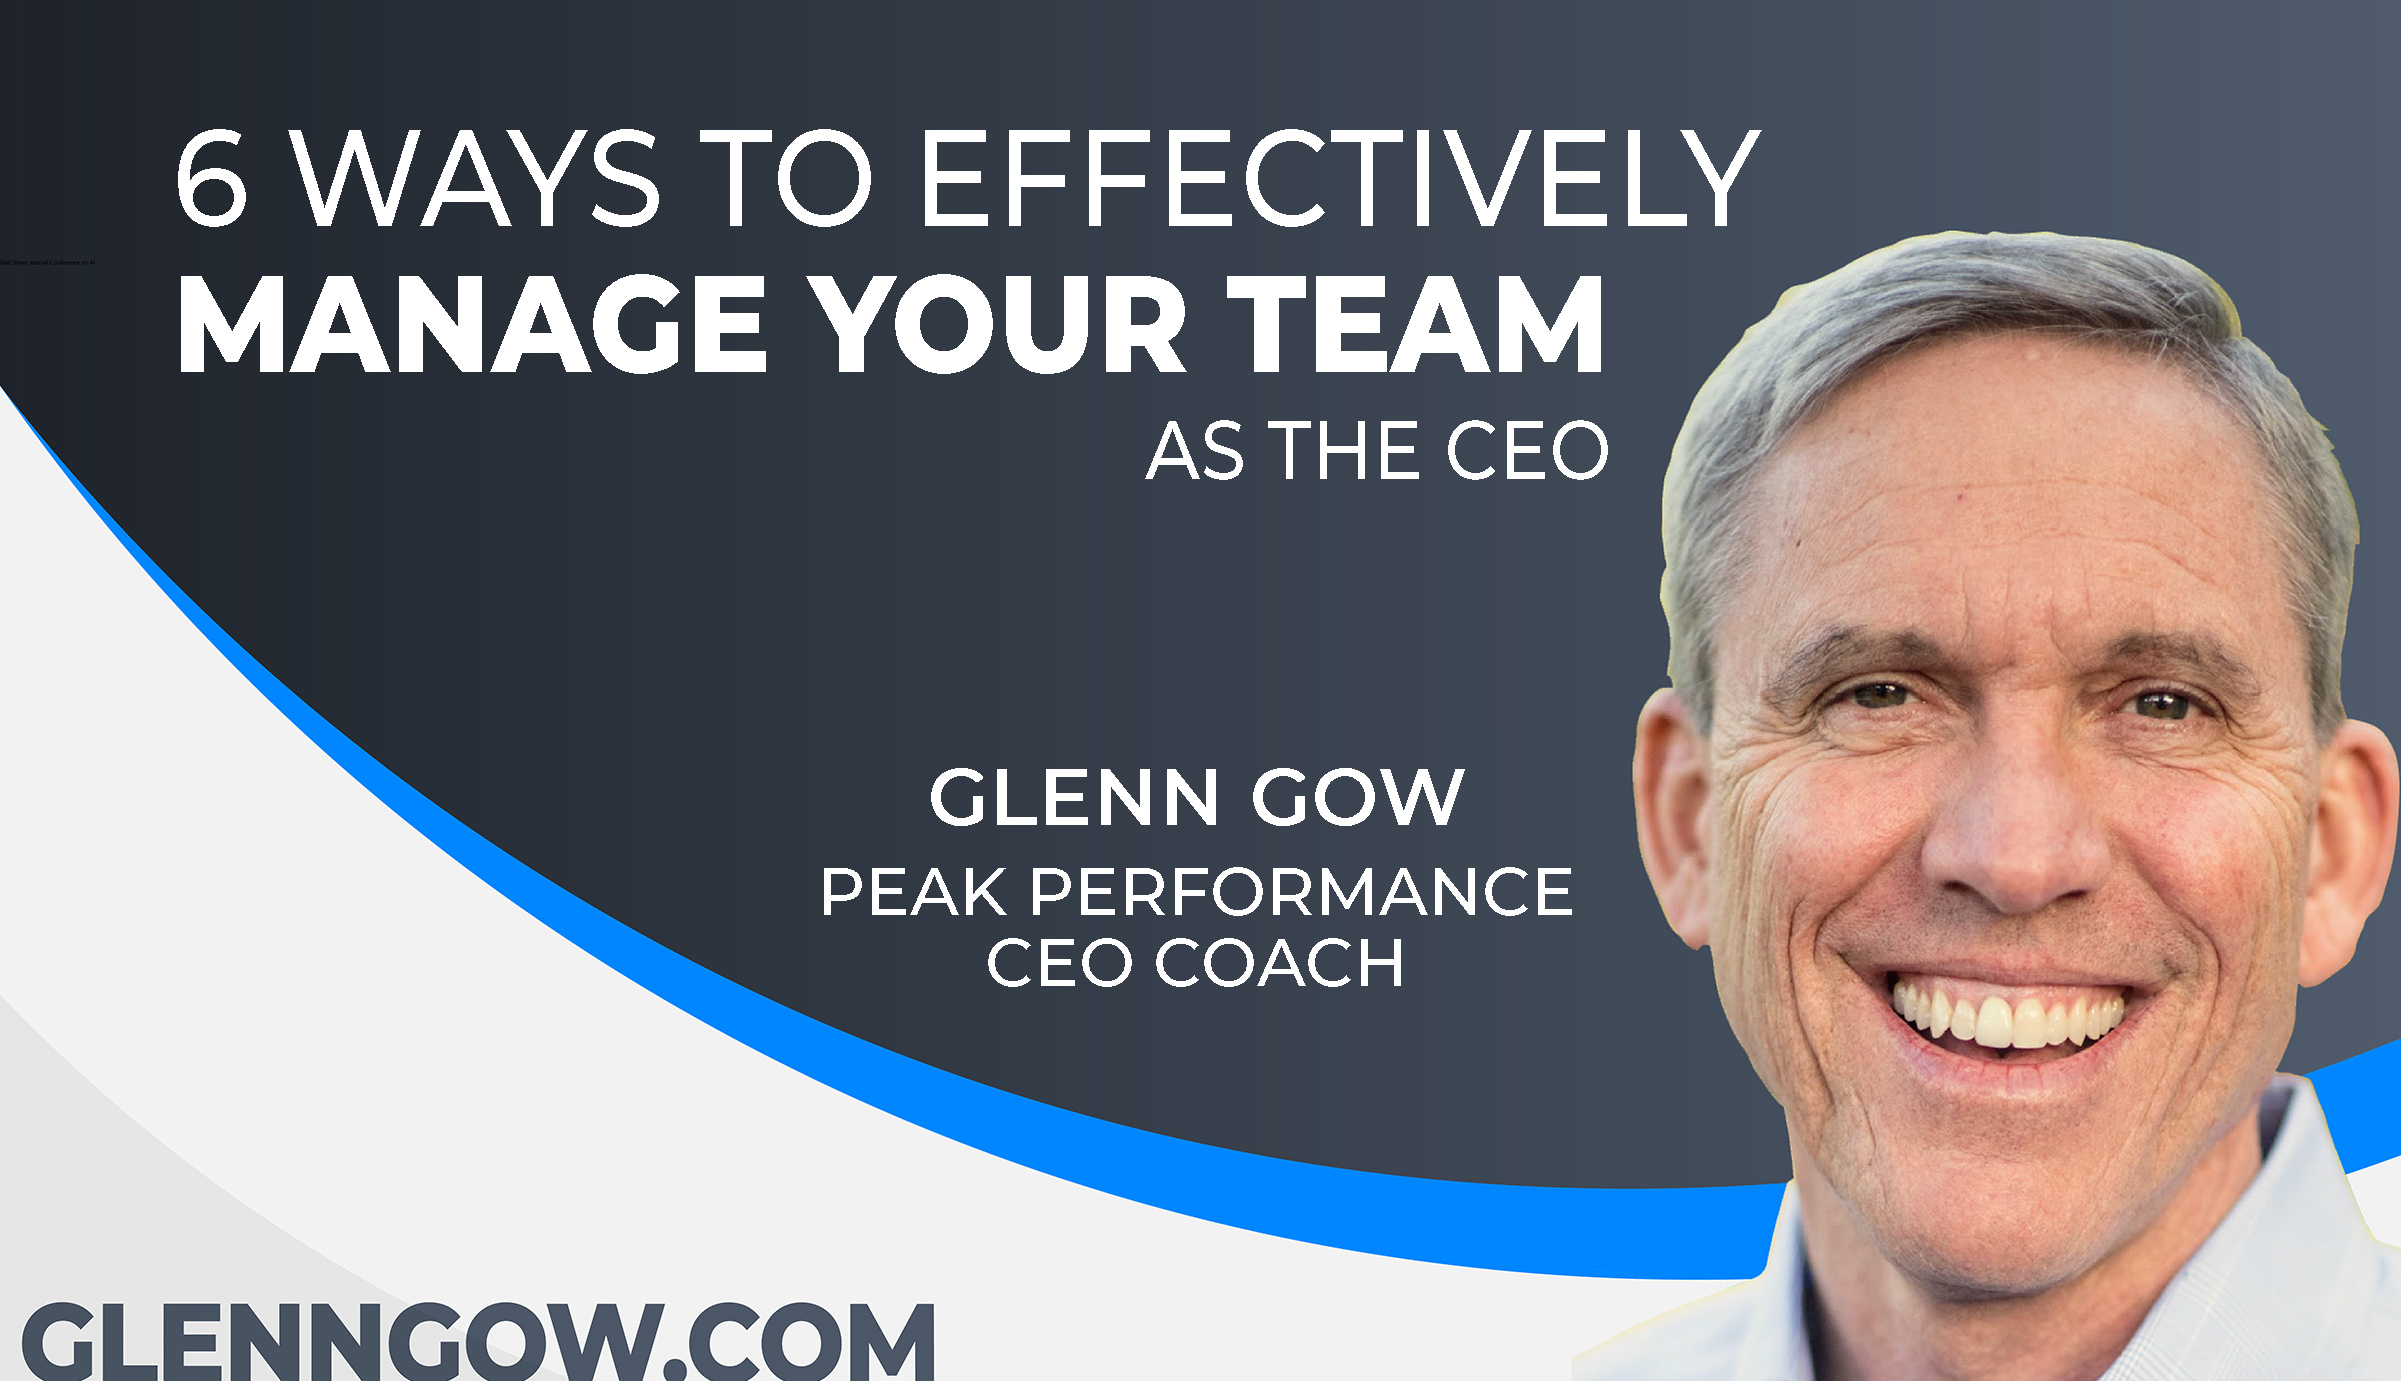 6 ways to effectively manage your team image banner